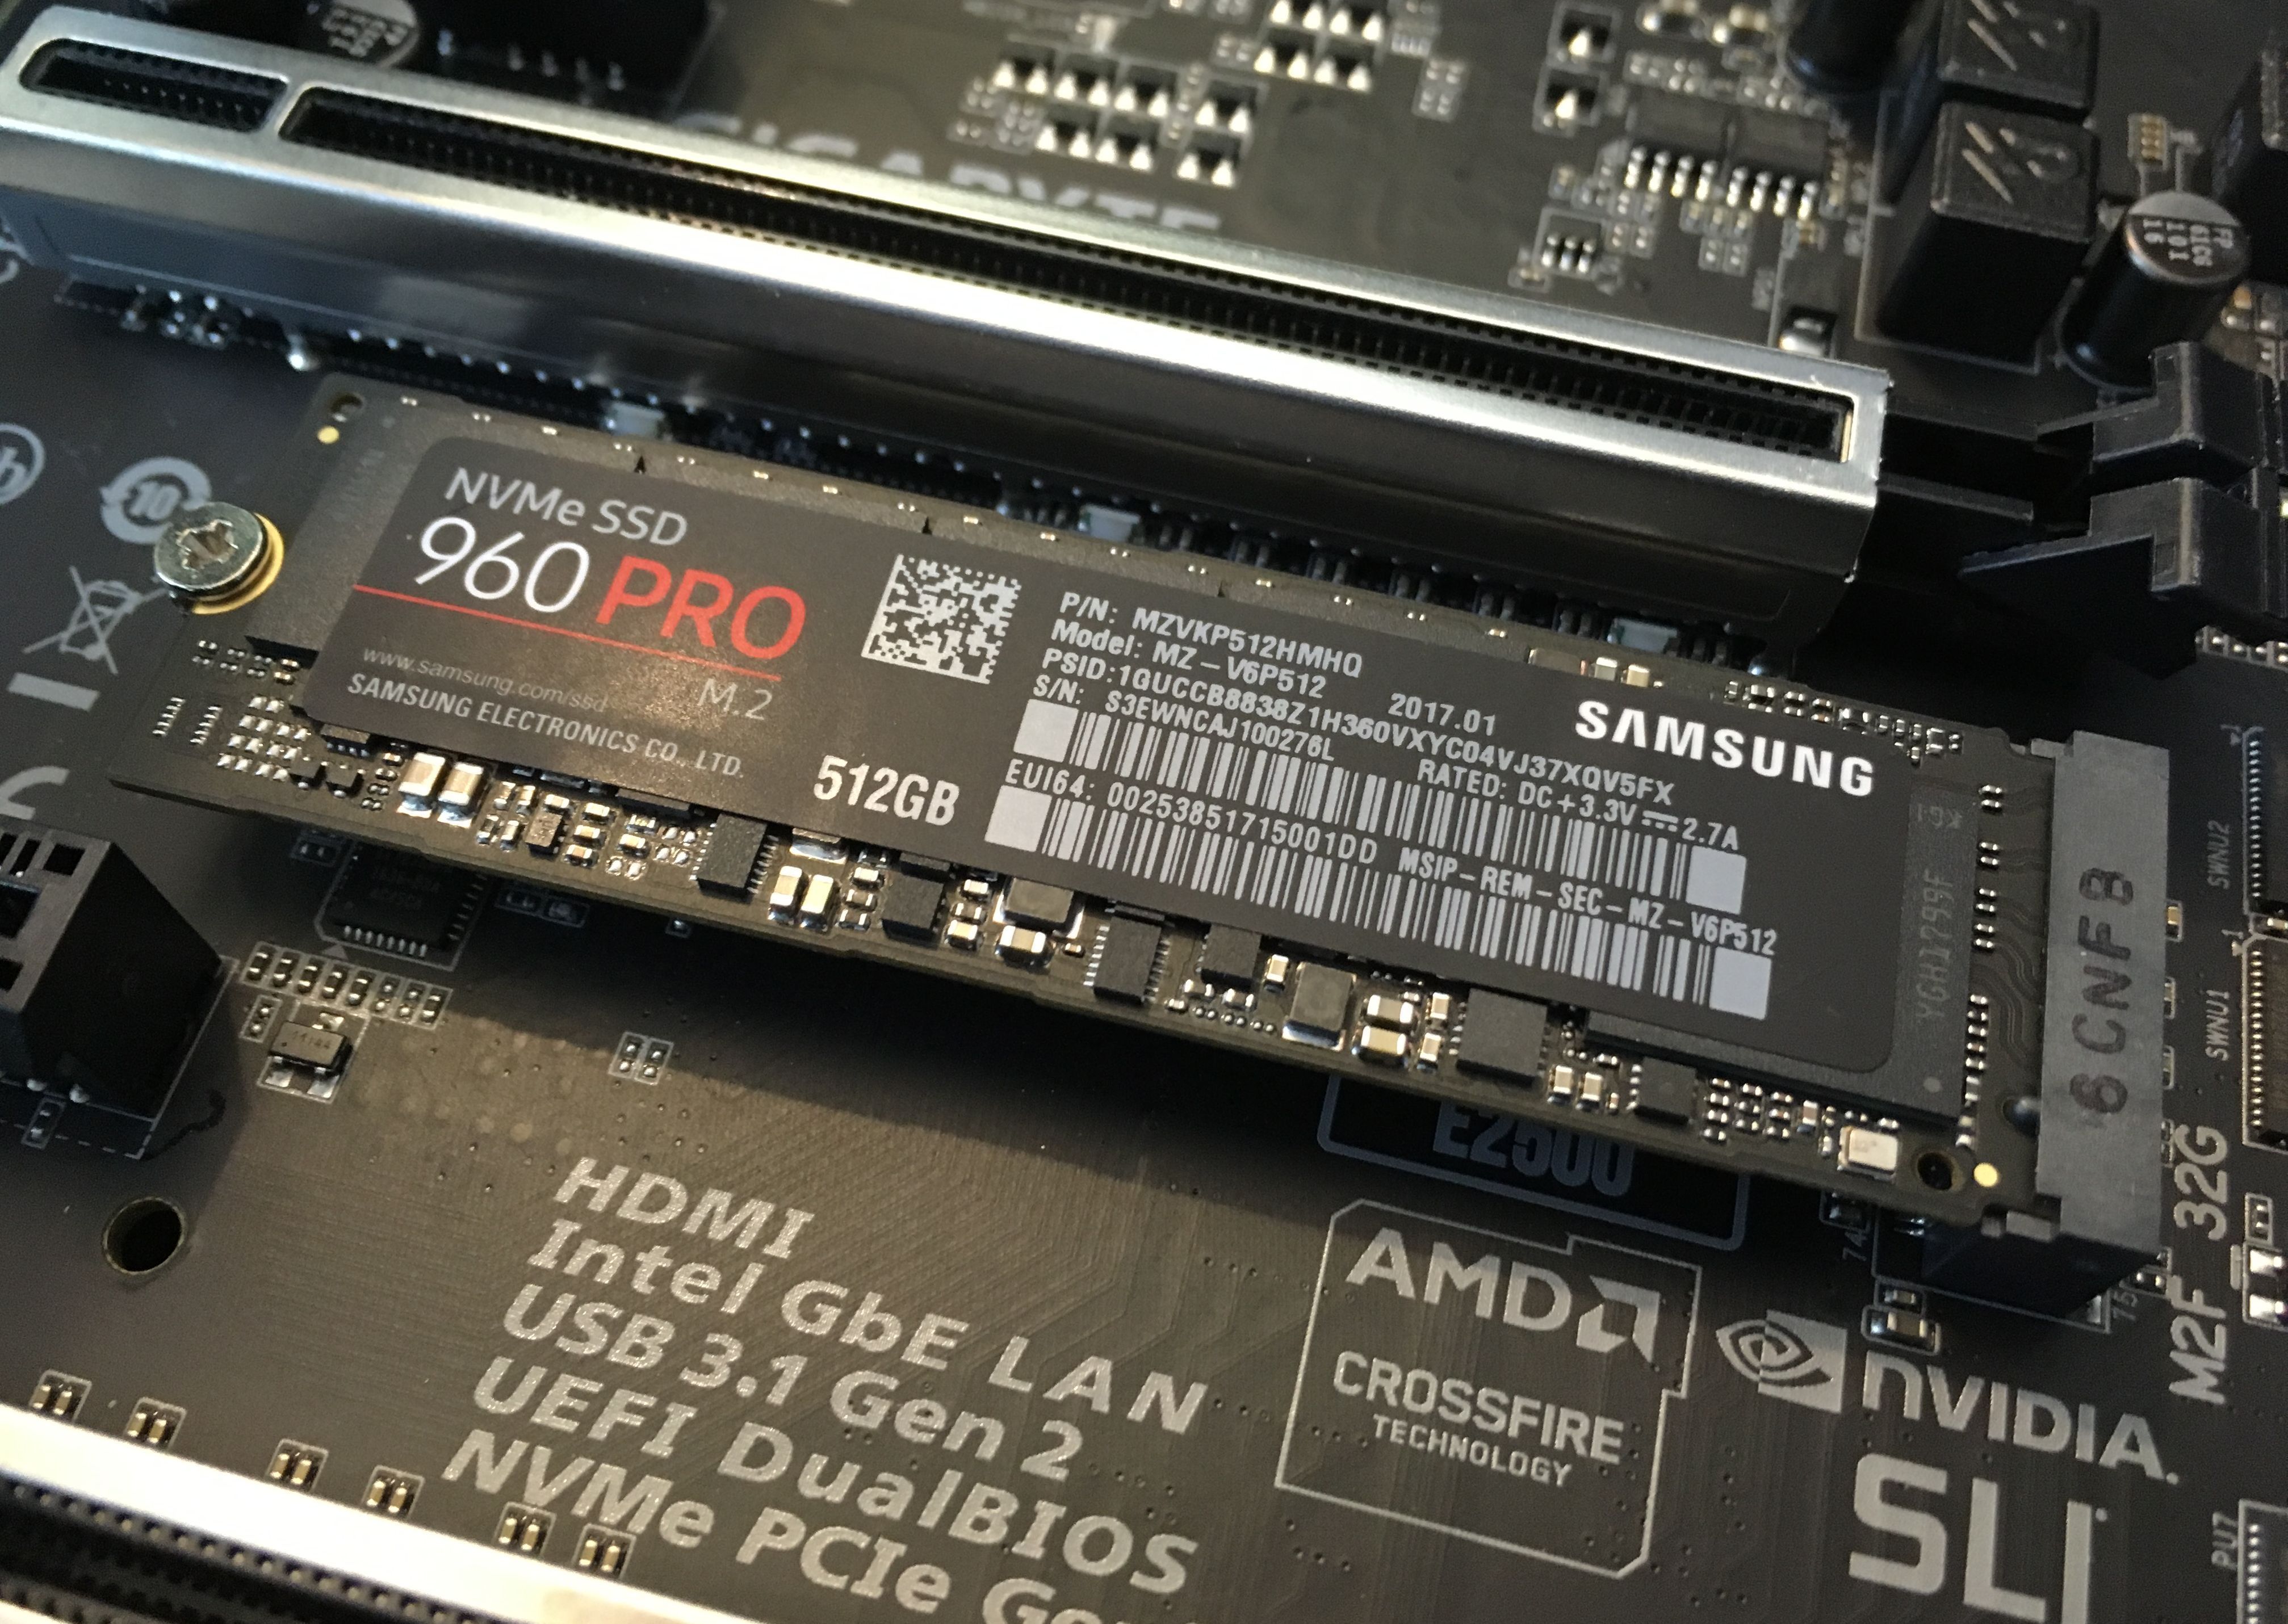 Does a Crucial P1 M.2 NVMe fit on Z170A PC MATE? : buildapc